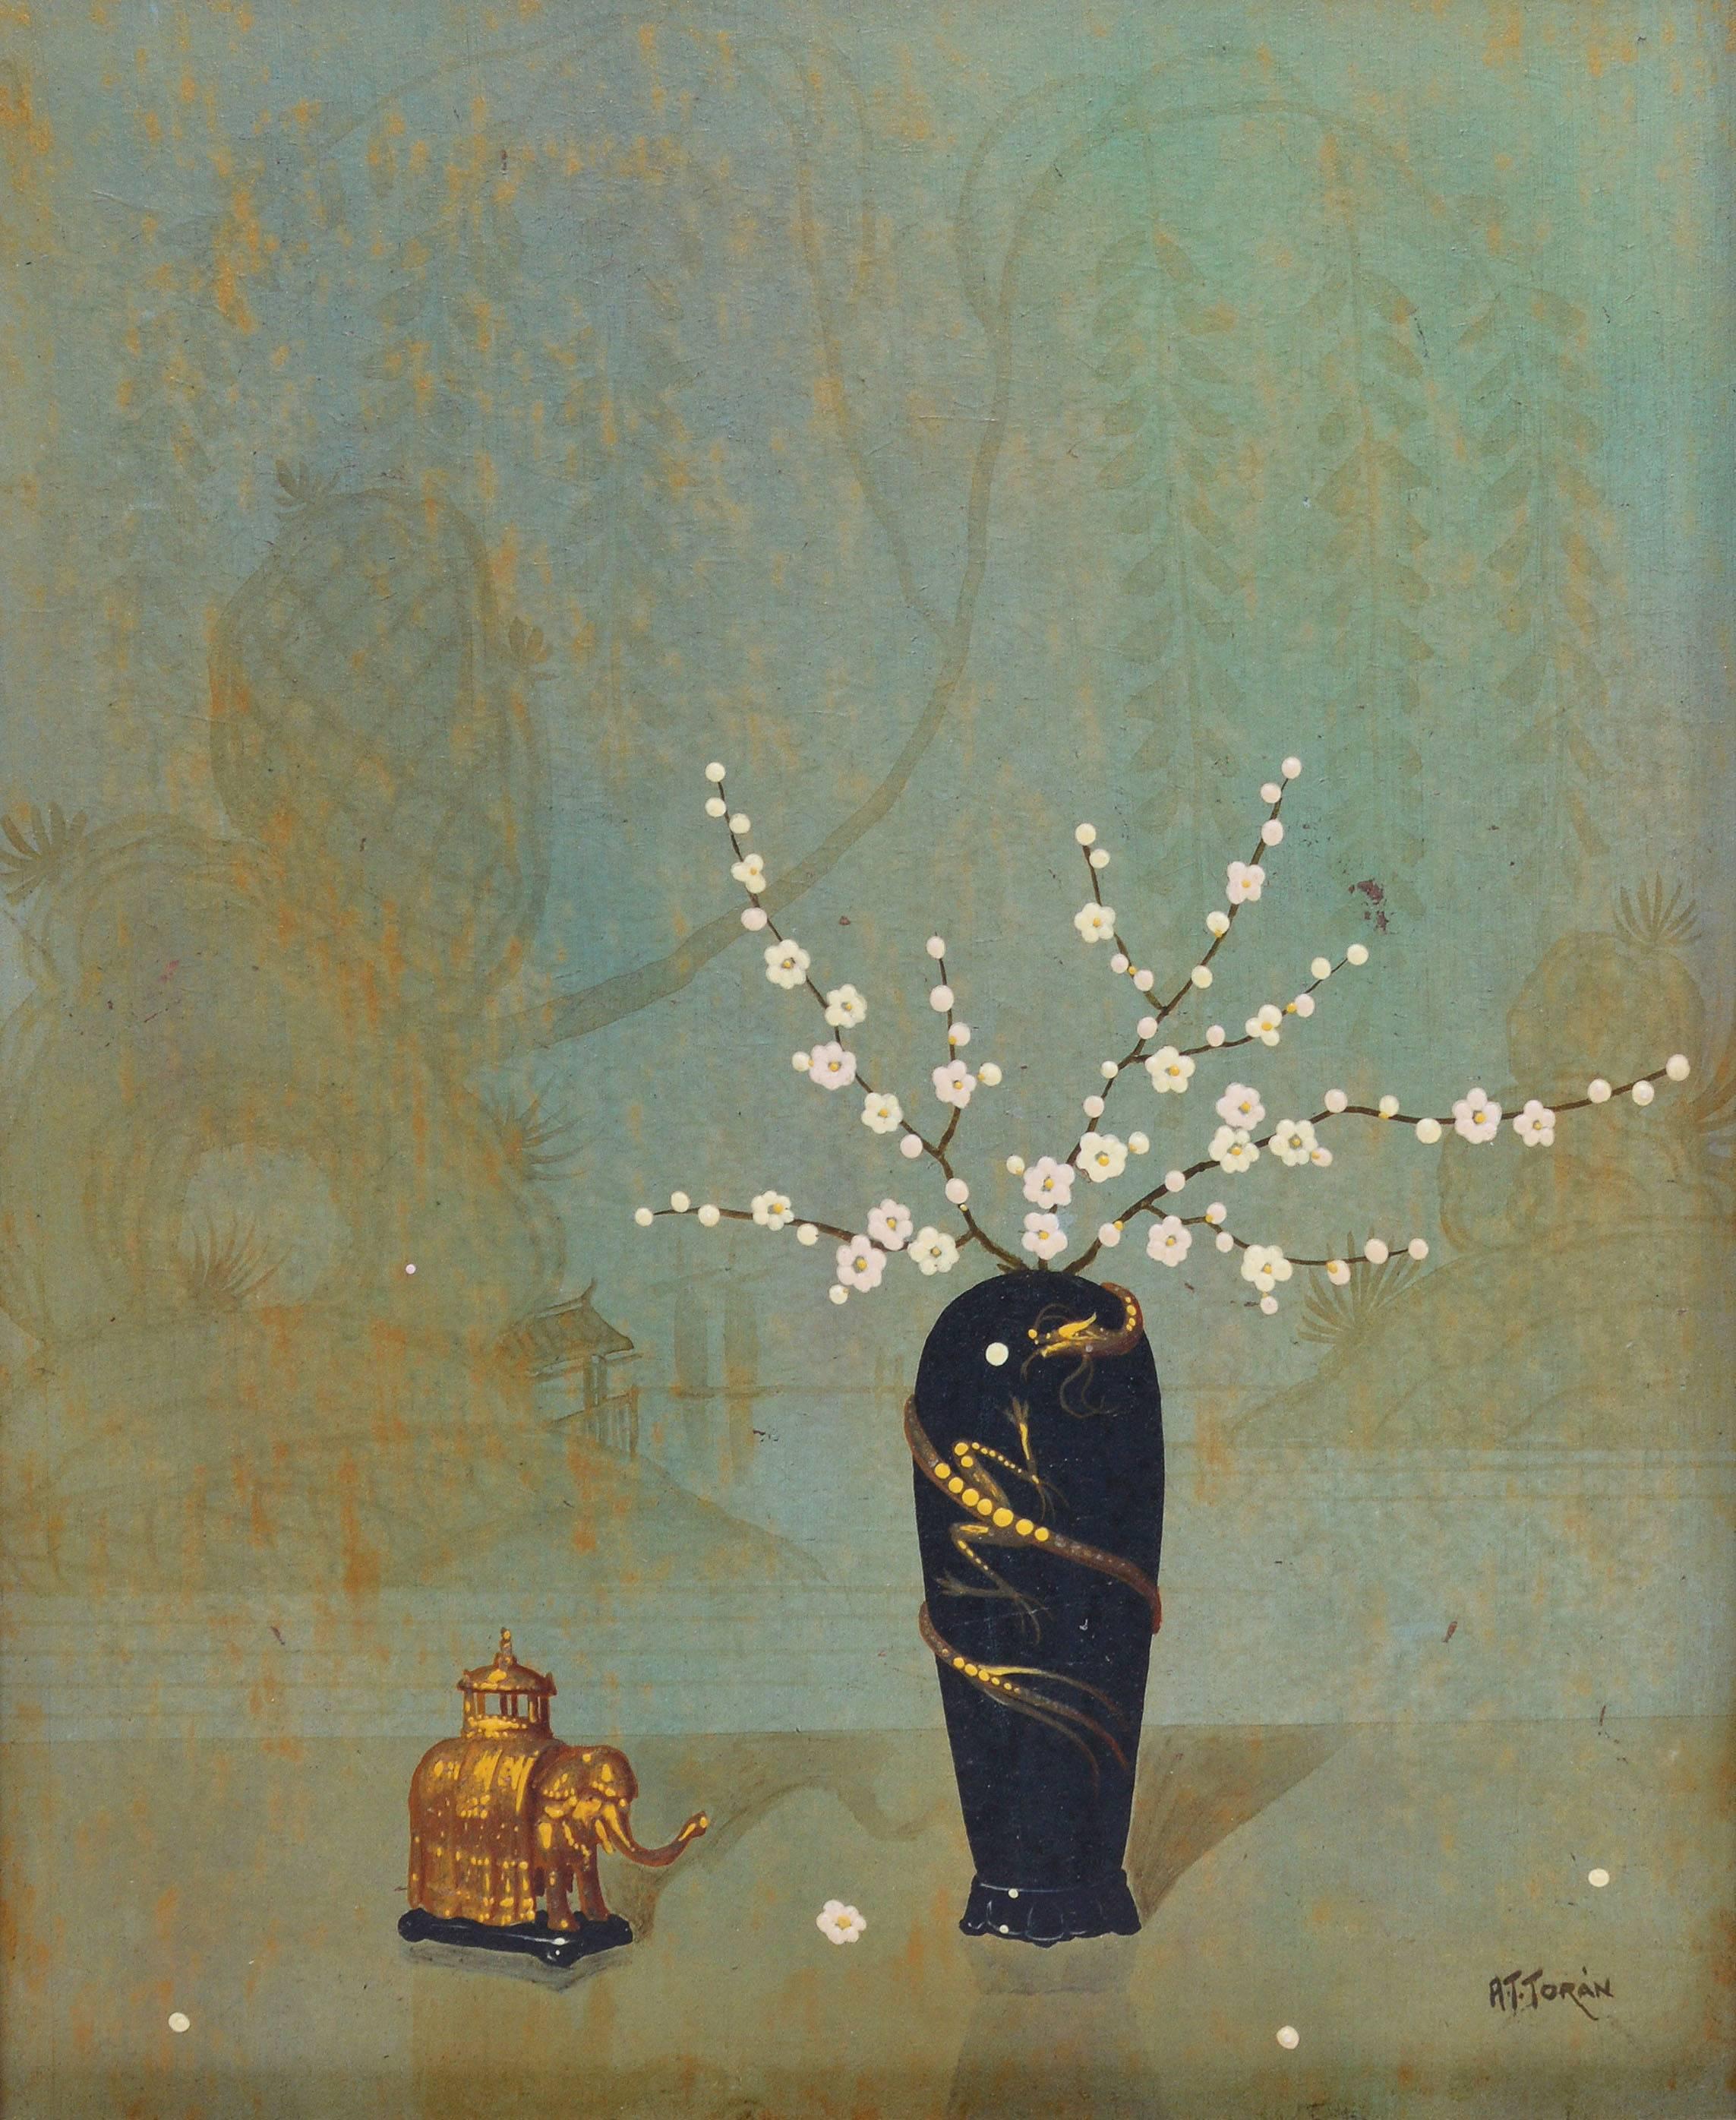 Realist still life with Japanese motifs and an elephant sculpture by Alfonso Toran (1896-1965).  Oil on board, circa 1930.  Signed lower right, "A. Toran".  Displayed in a giltwood frame.  Image size, 8"L x 10"H, overall